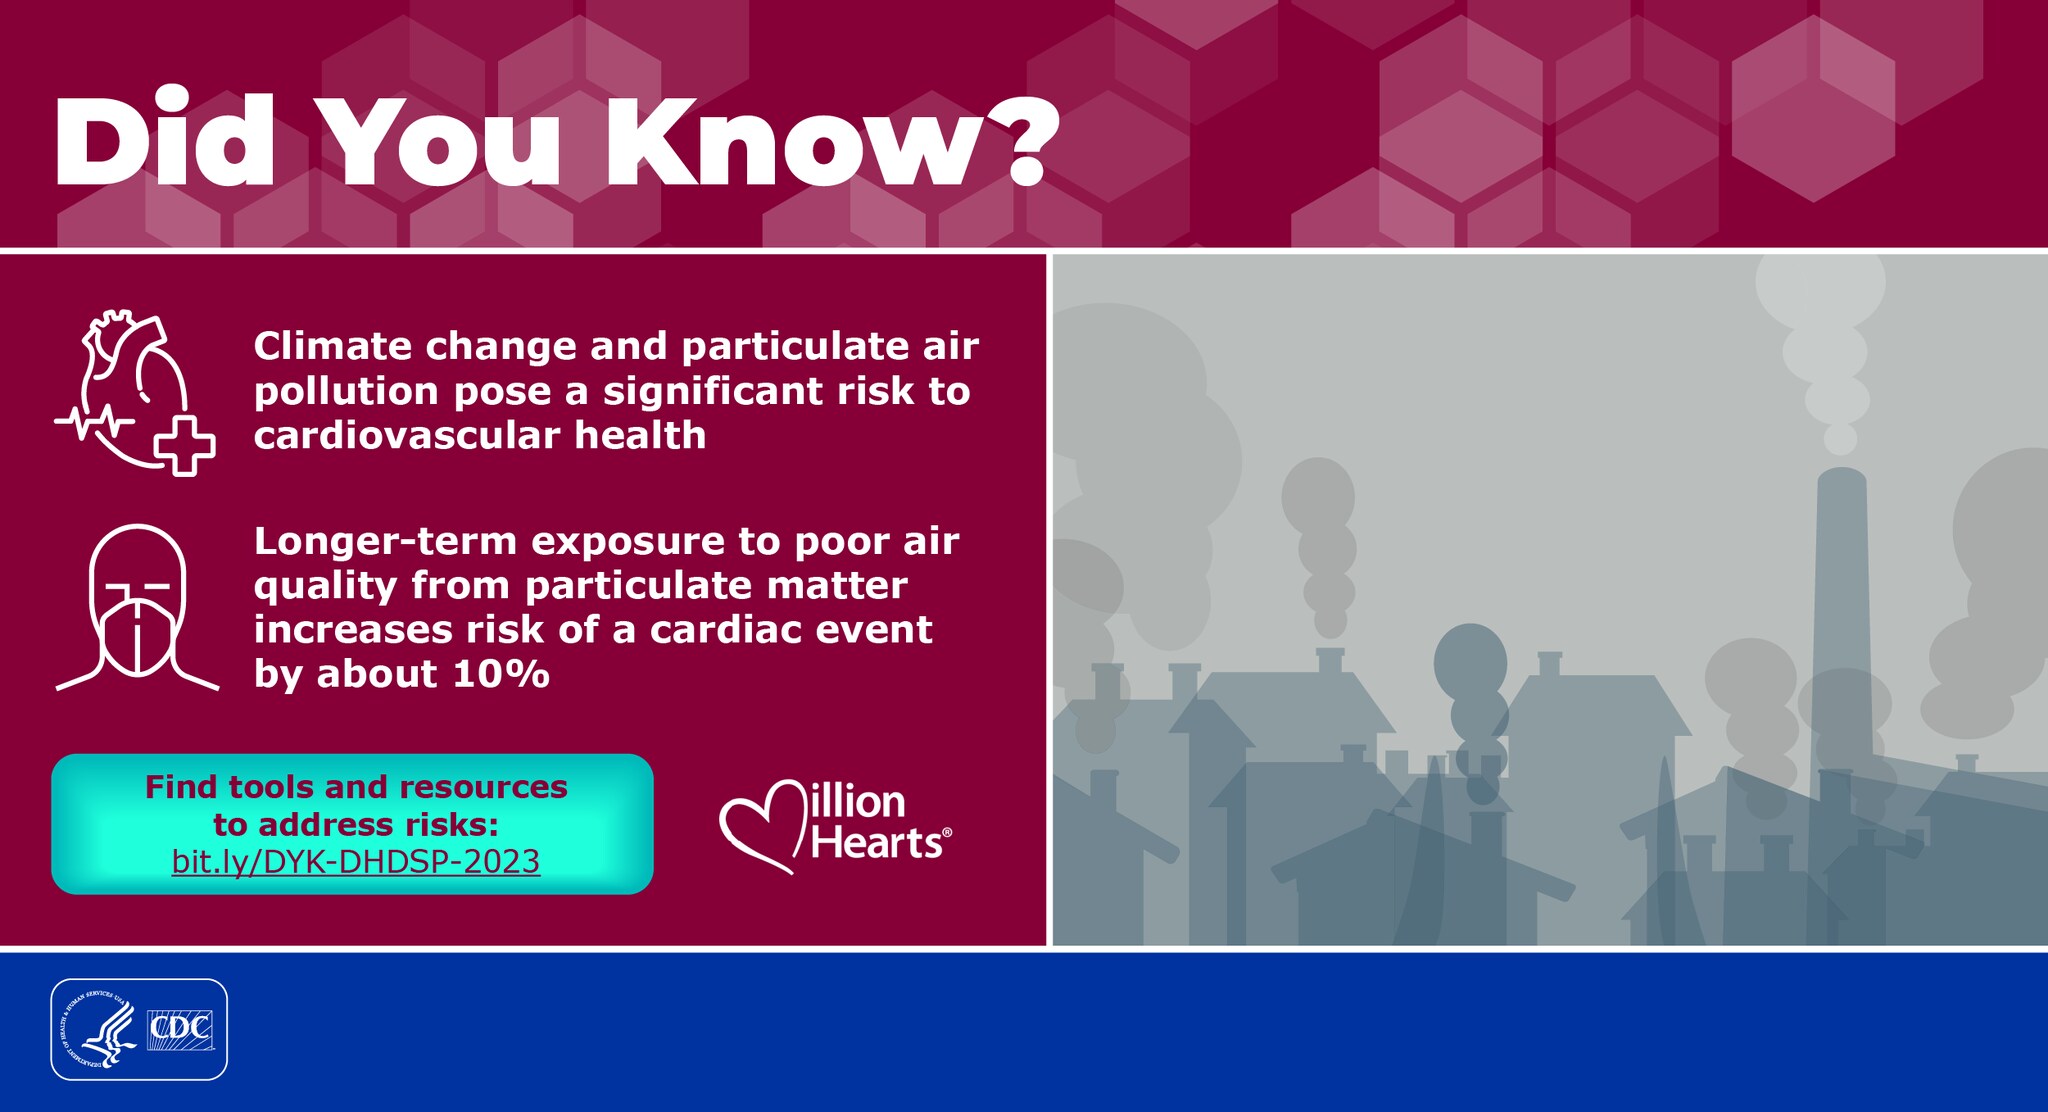 Alt text:  An infographic titled Did You Know? Text says: Climate change and particulate air pollution pose a significant risk to cardiovascular health. Longer-term exposure to poor air quality from particulate matter increases risk of a cardiac event by about 10%. Find tools and resources to address risks at bit.ly/DYK-DHDSP-2023.